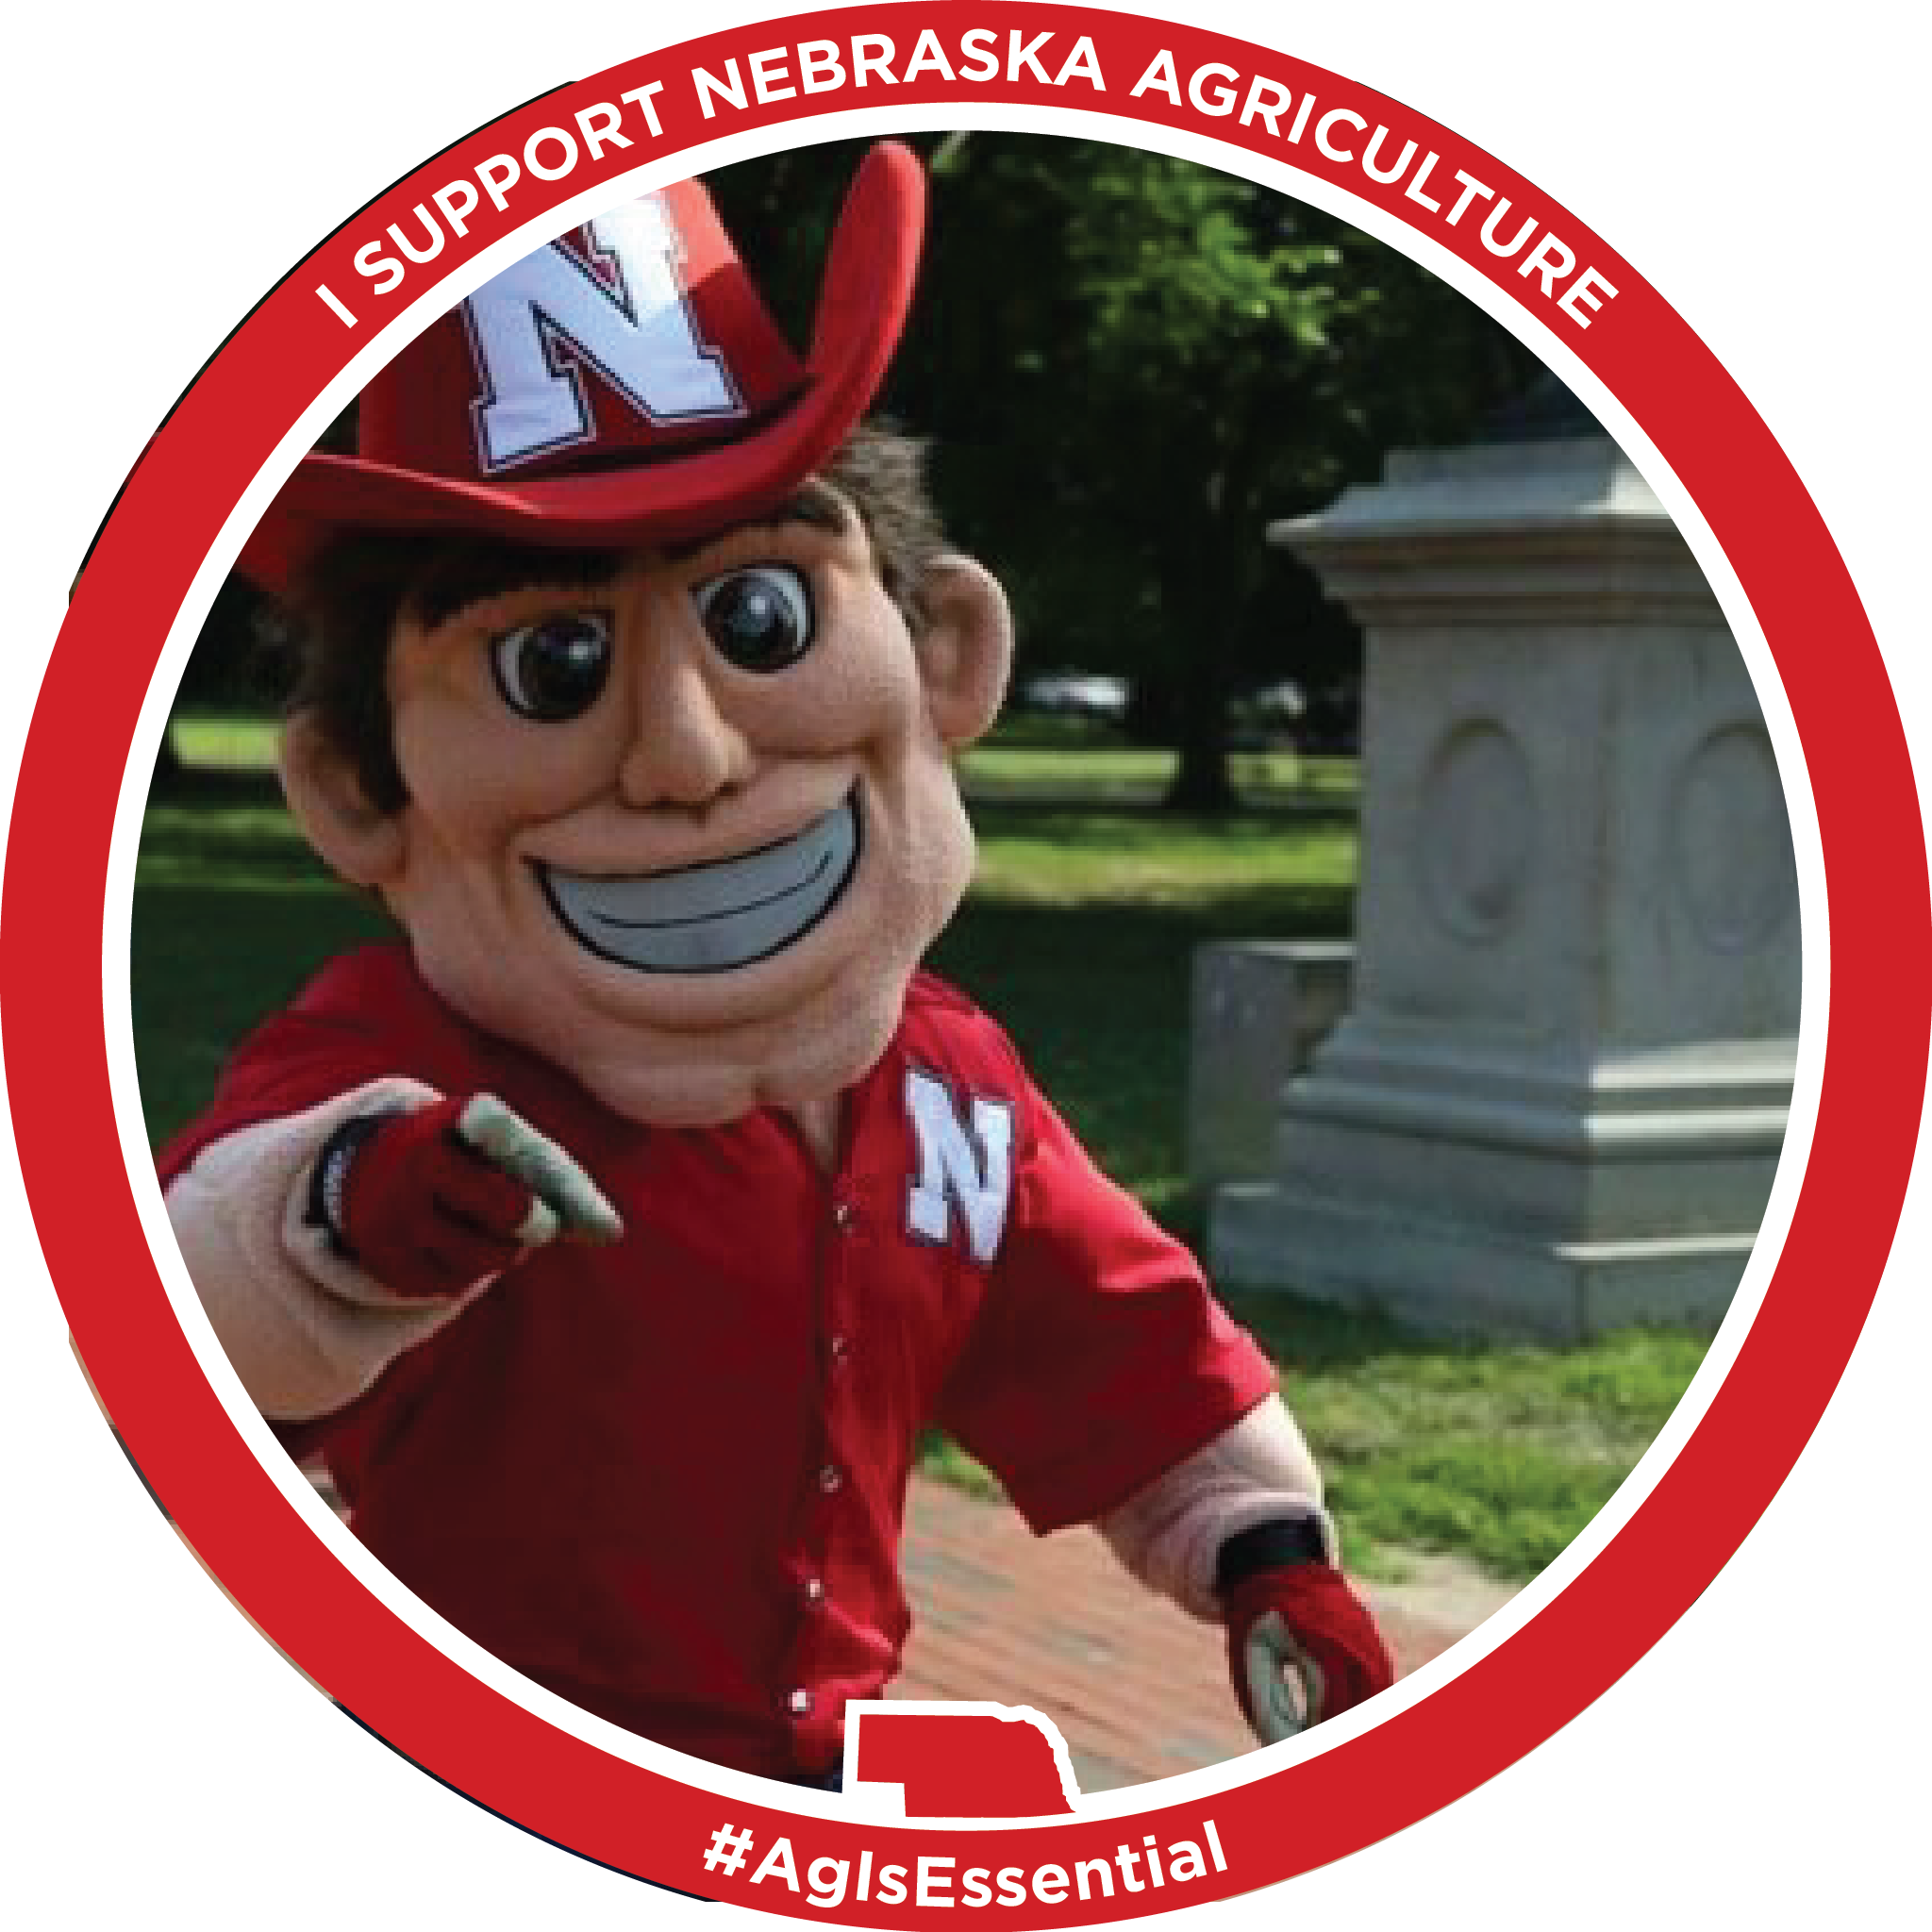 Herbie Husker with #agisessential frame